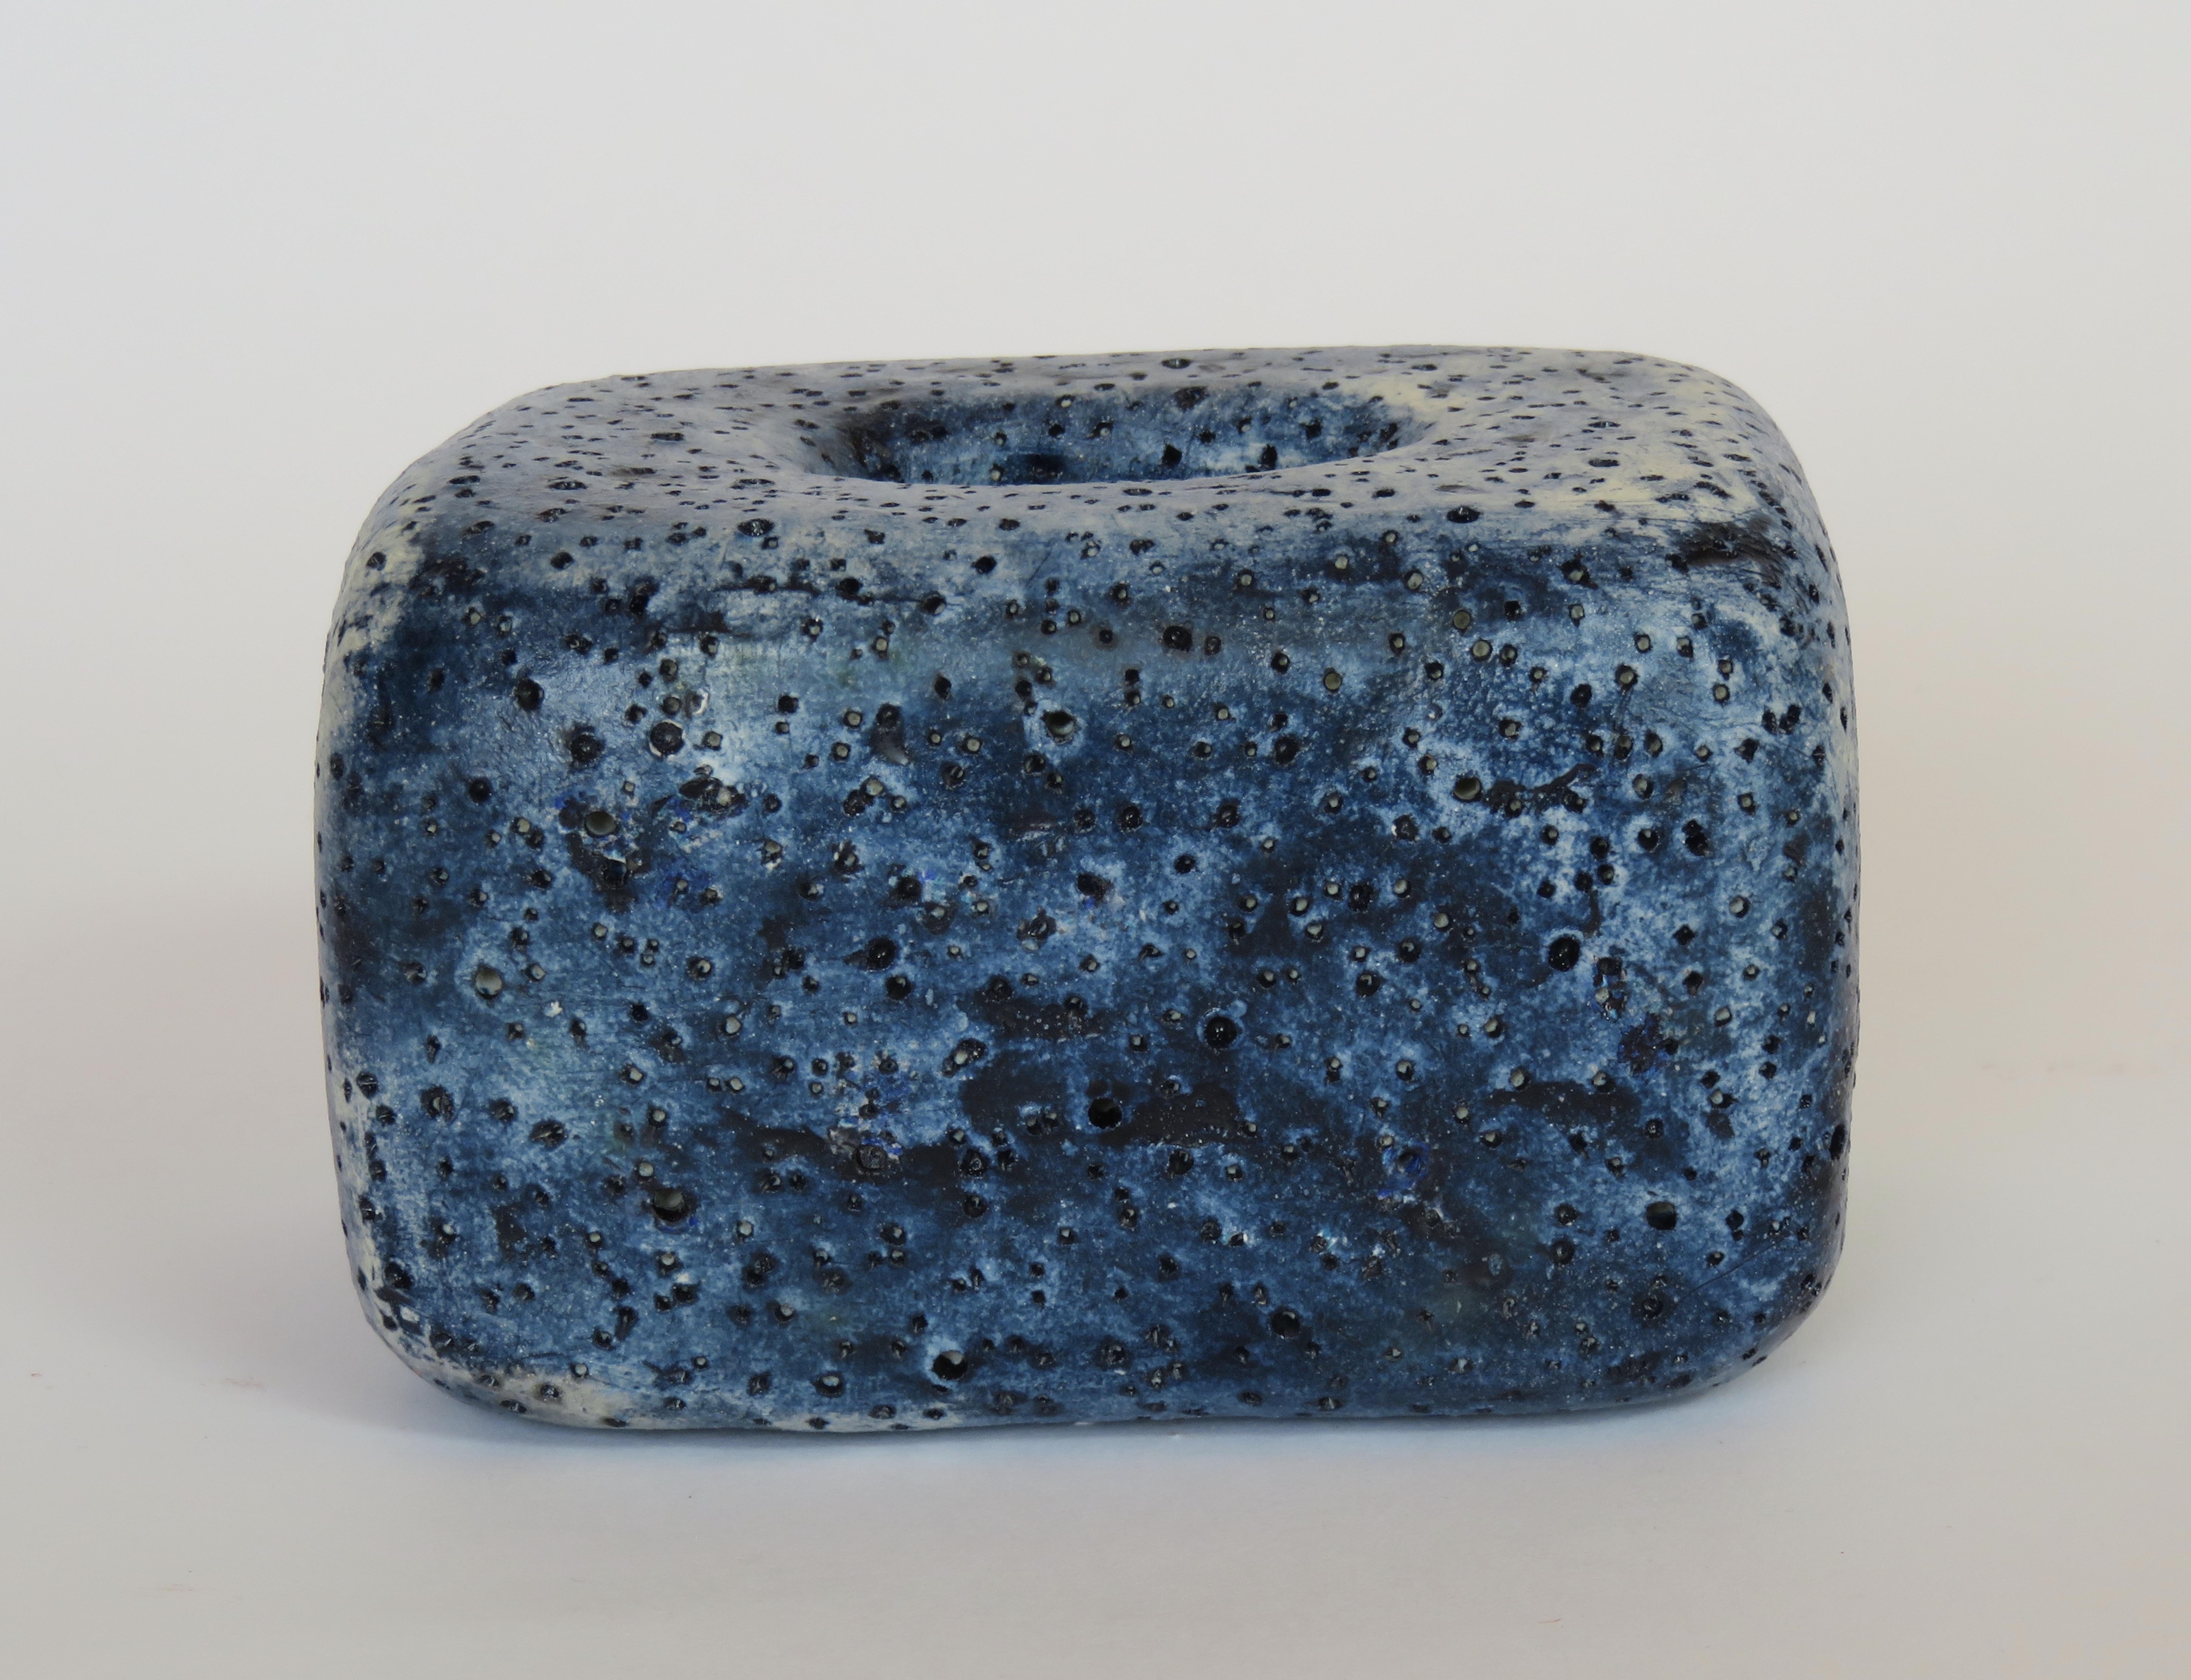 Hand Textured Ceramic Sculpture, Oblong Cube with Oval Opening in Deep Blue Wash 1